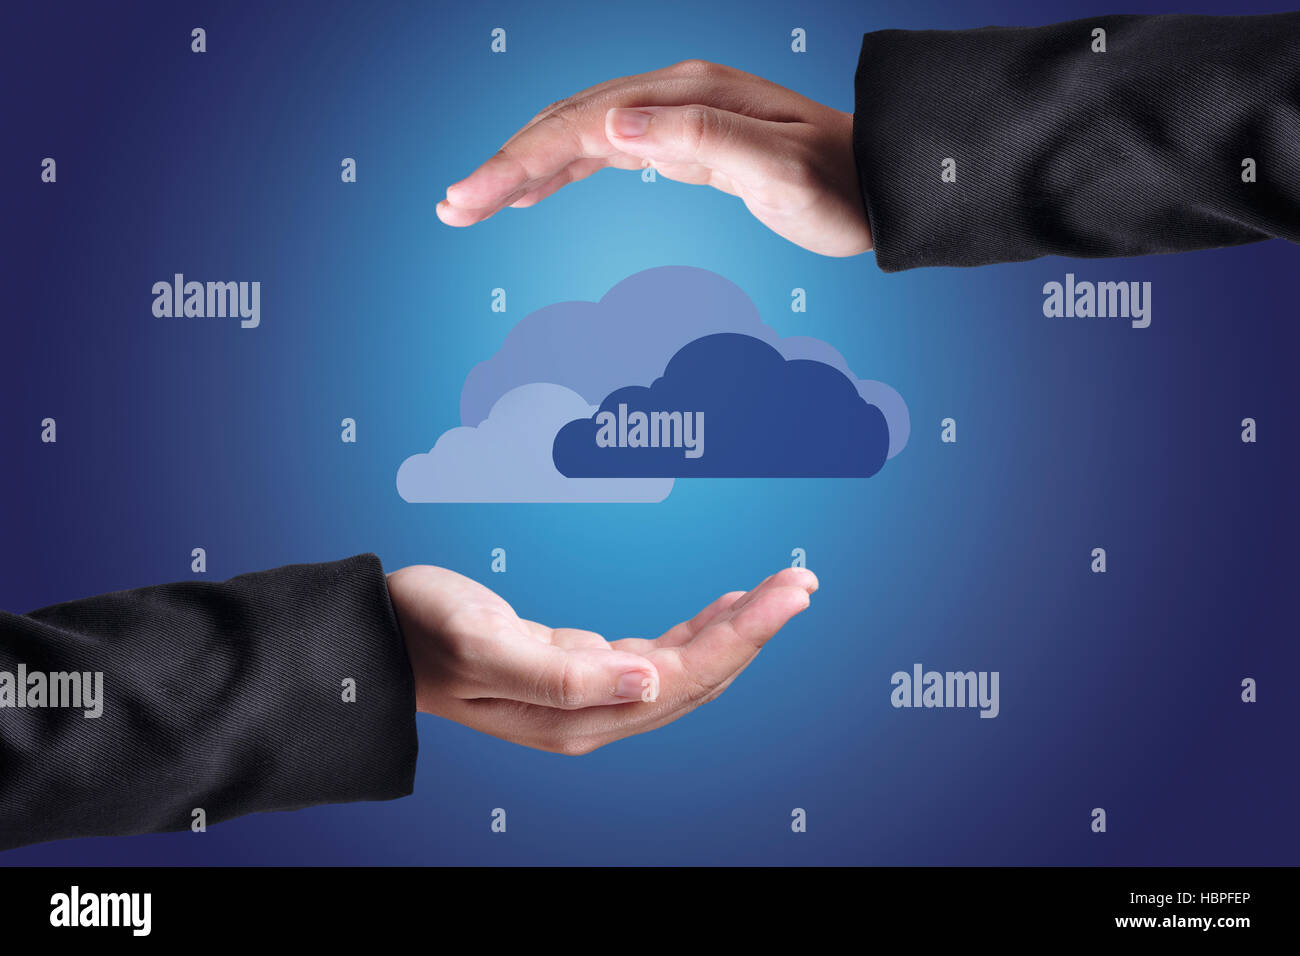 Clouds Above Hands. Cloud Computing Concept. Stock Photo